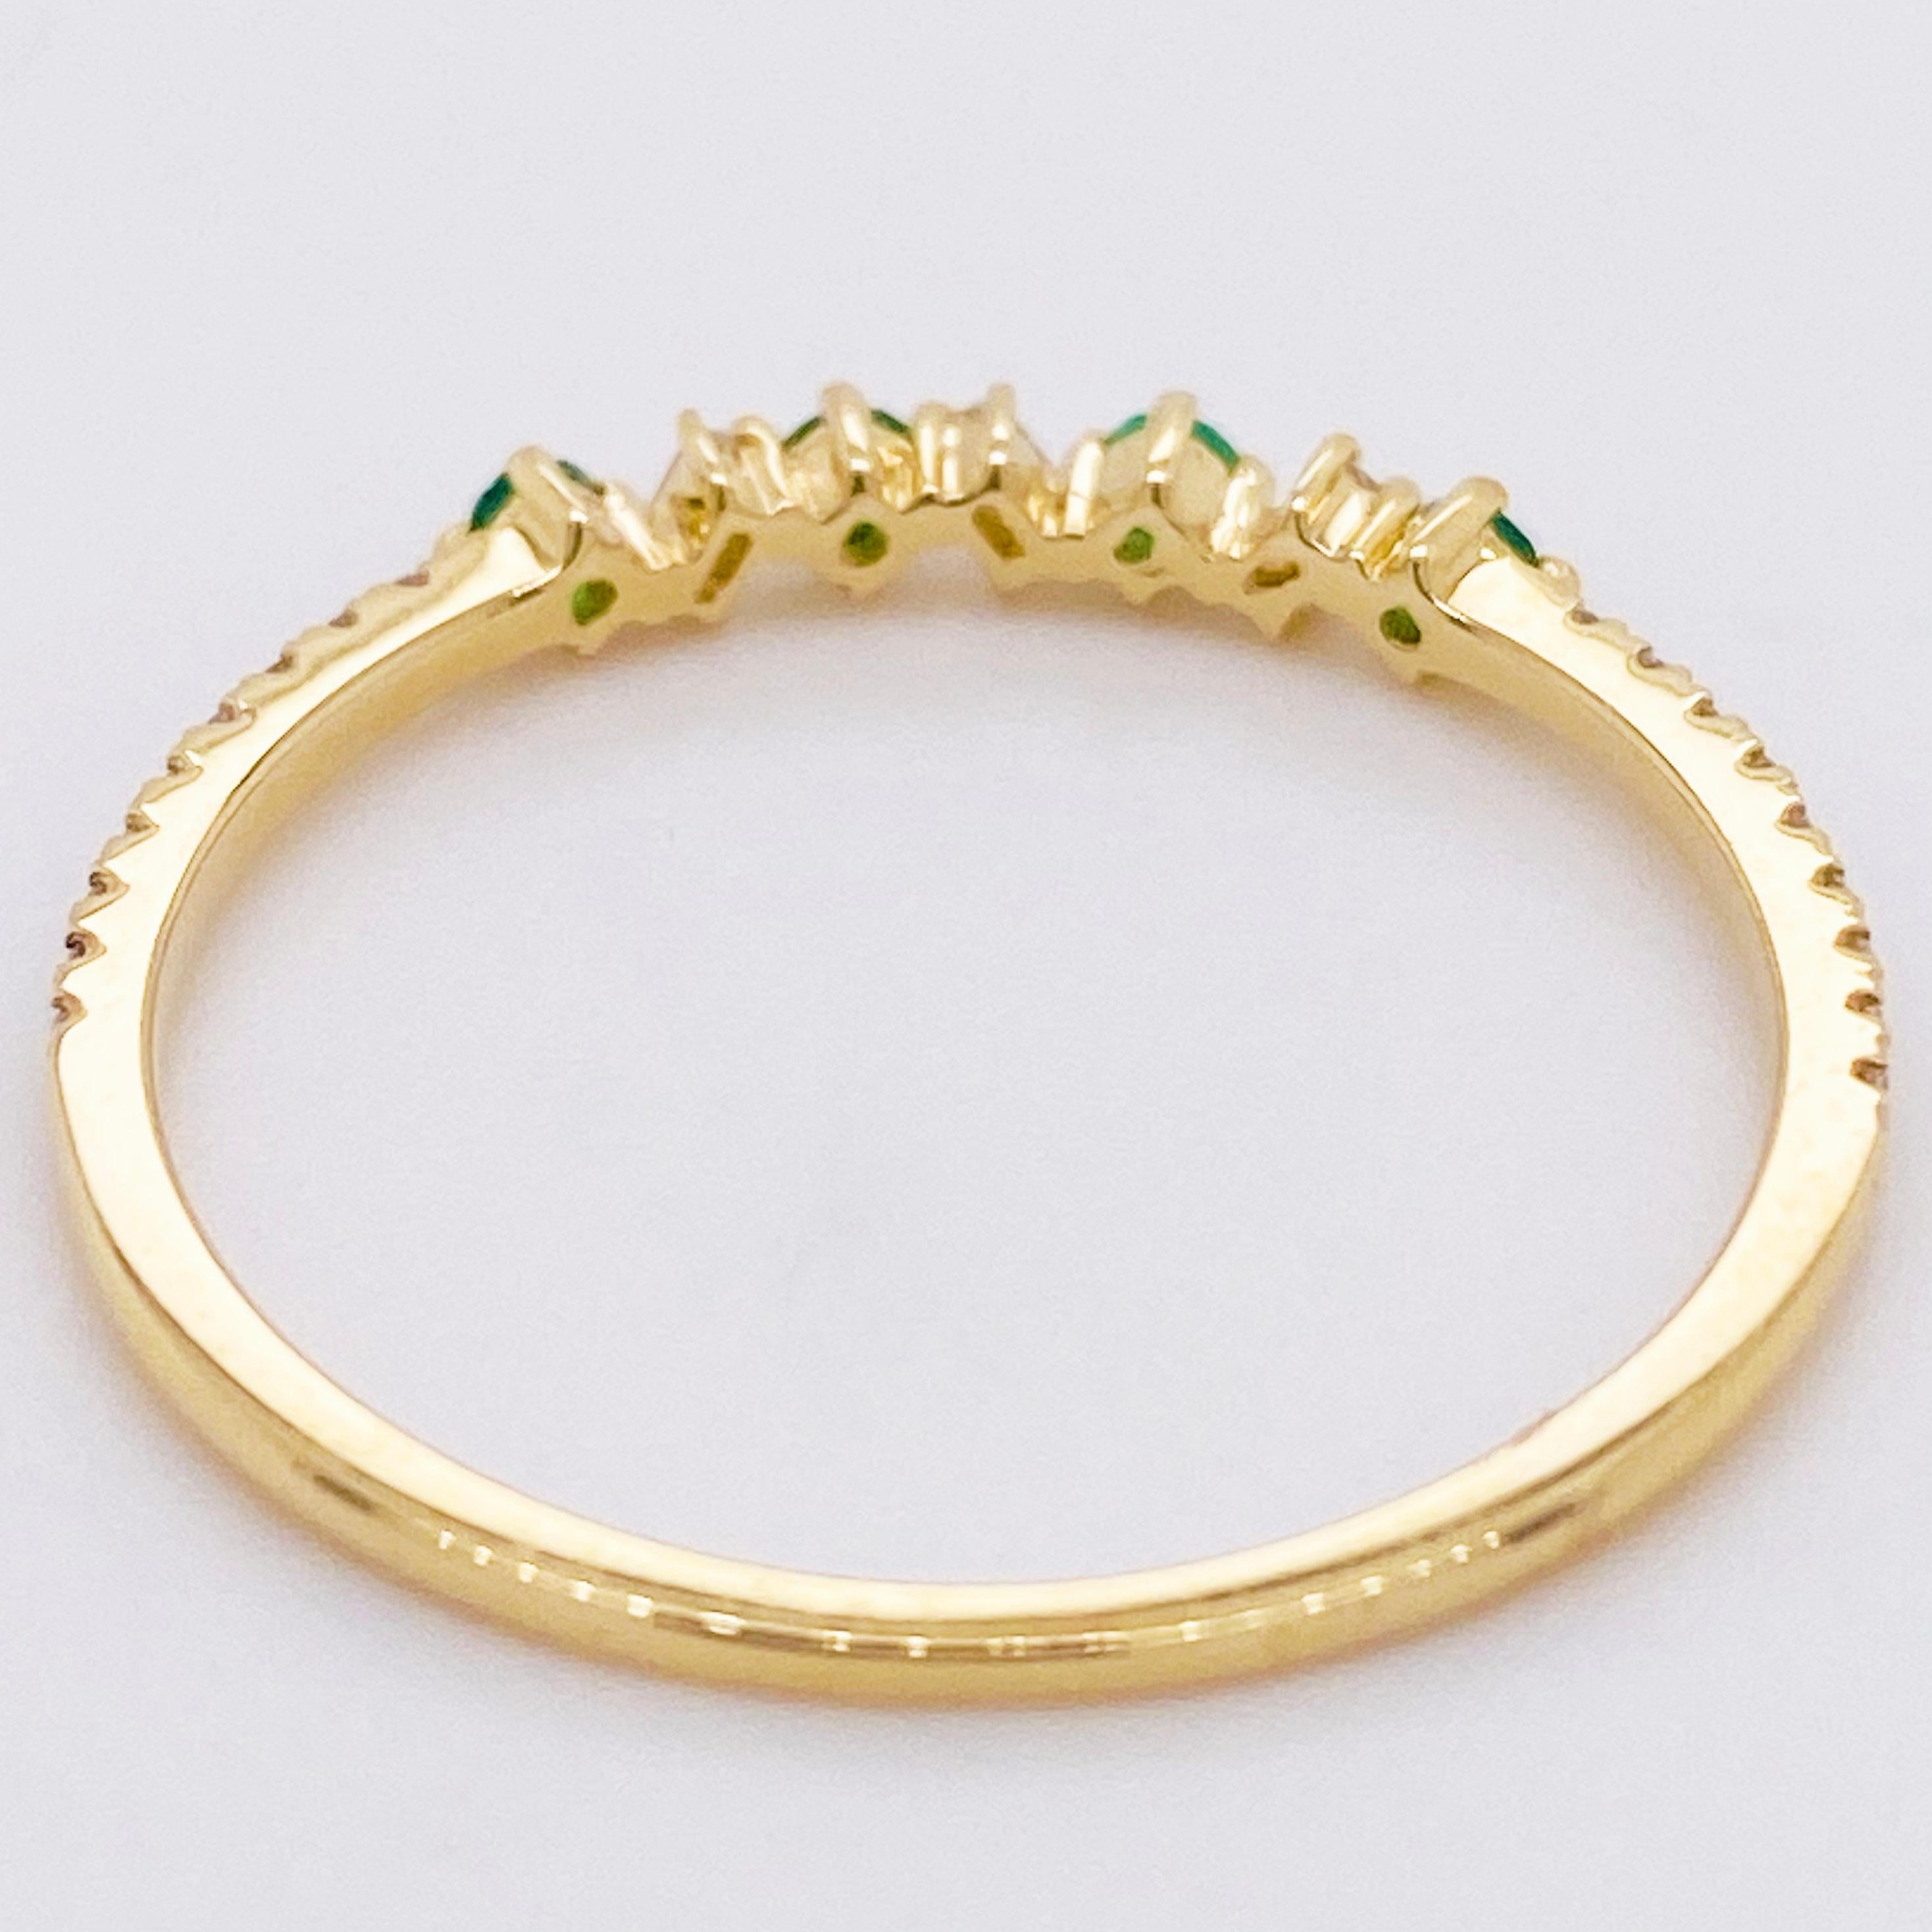 Emerald Diamond Ring, 14 Karat Gold, Round Emerald Baguette Diamond Band Stack In New Condition For Sale In Austin, TX